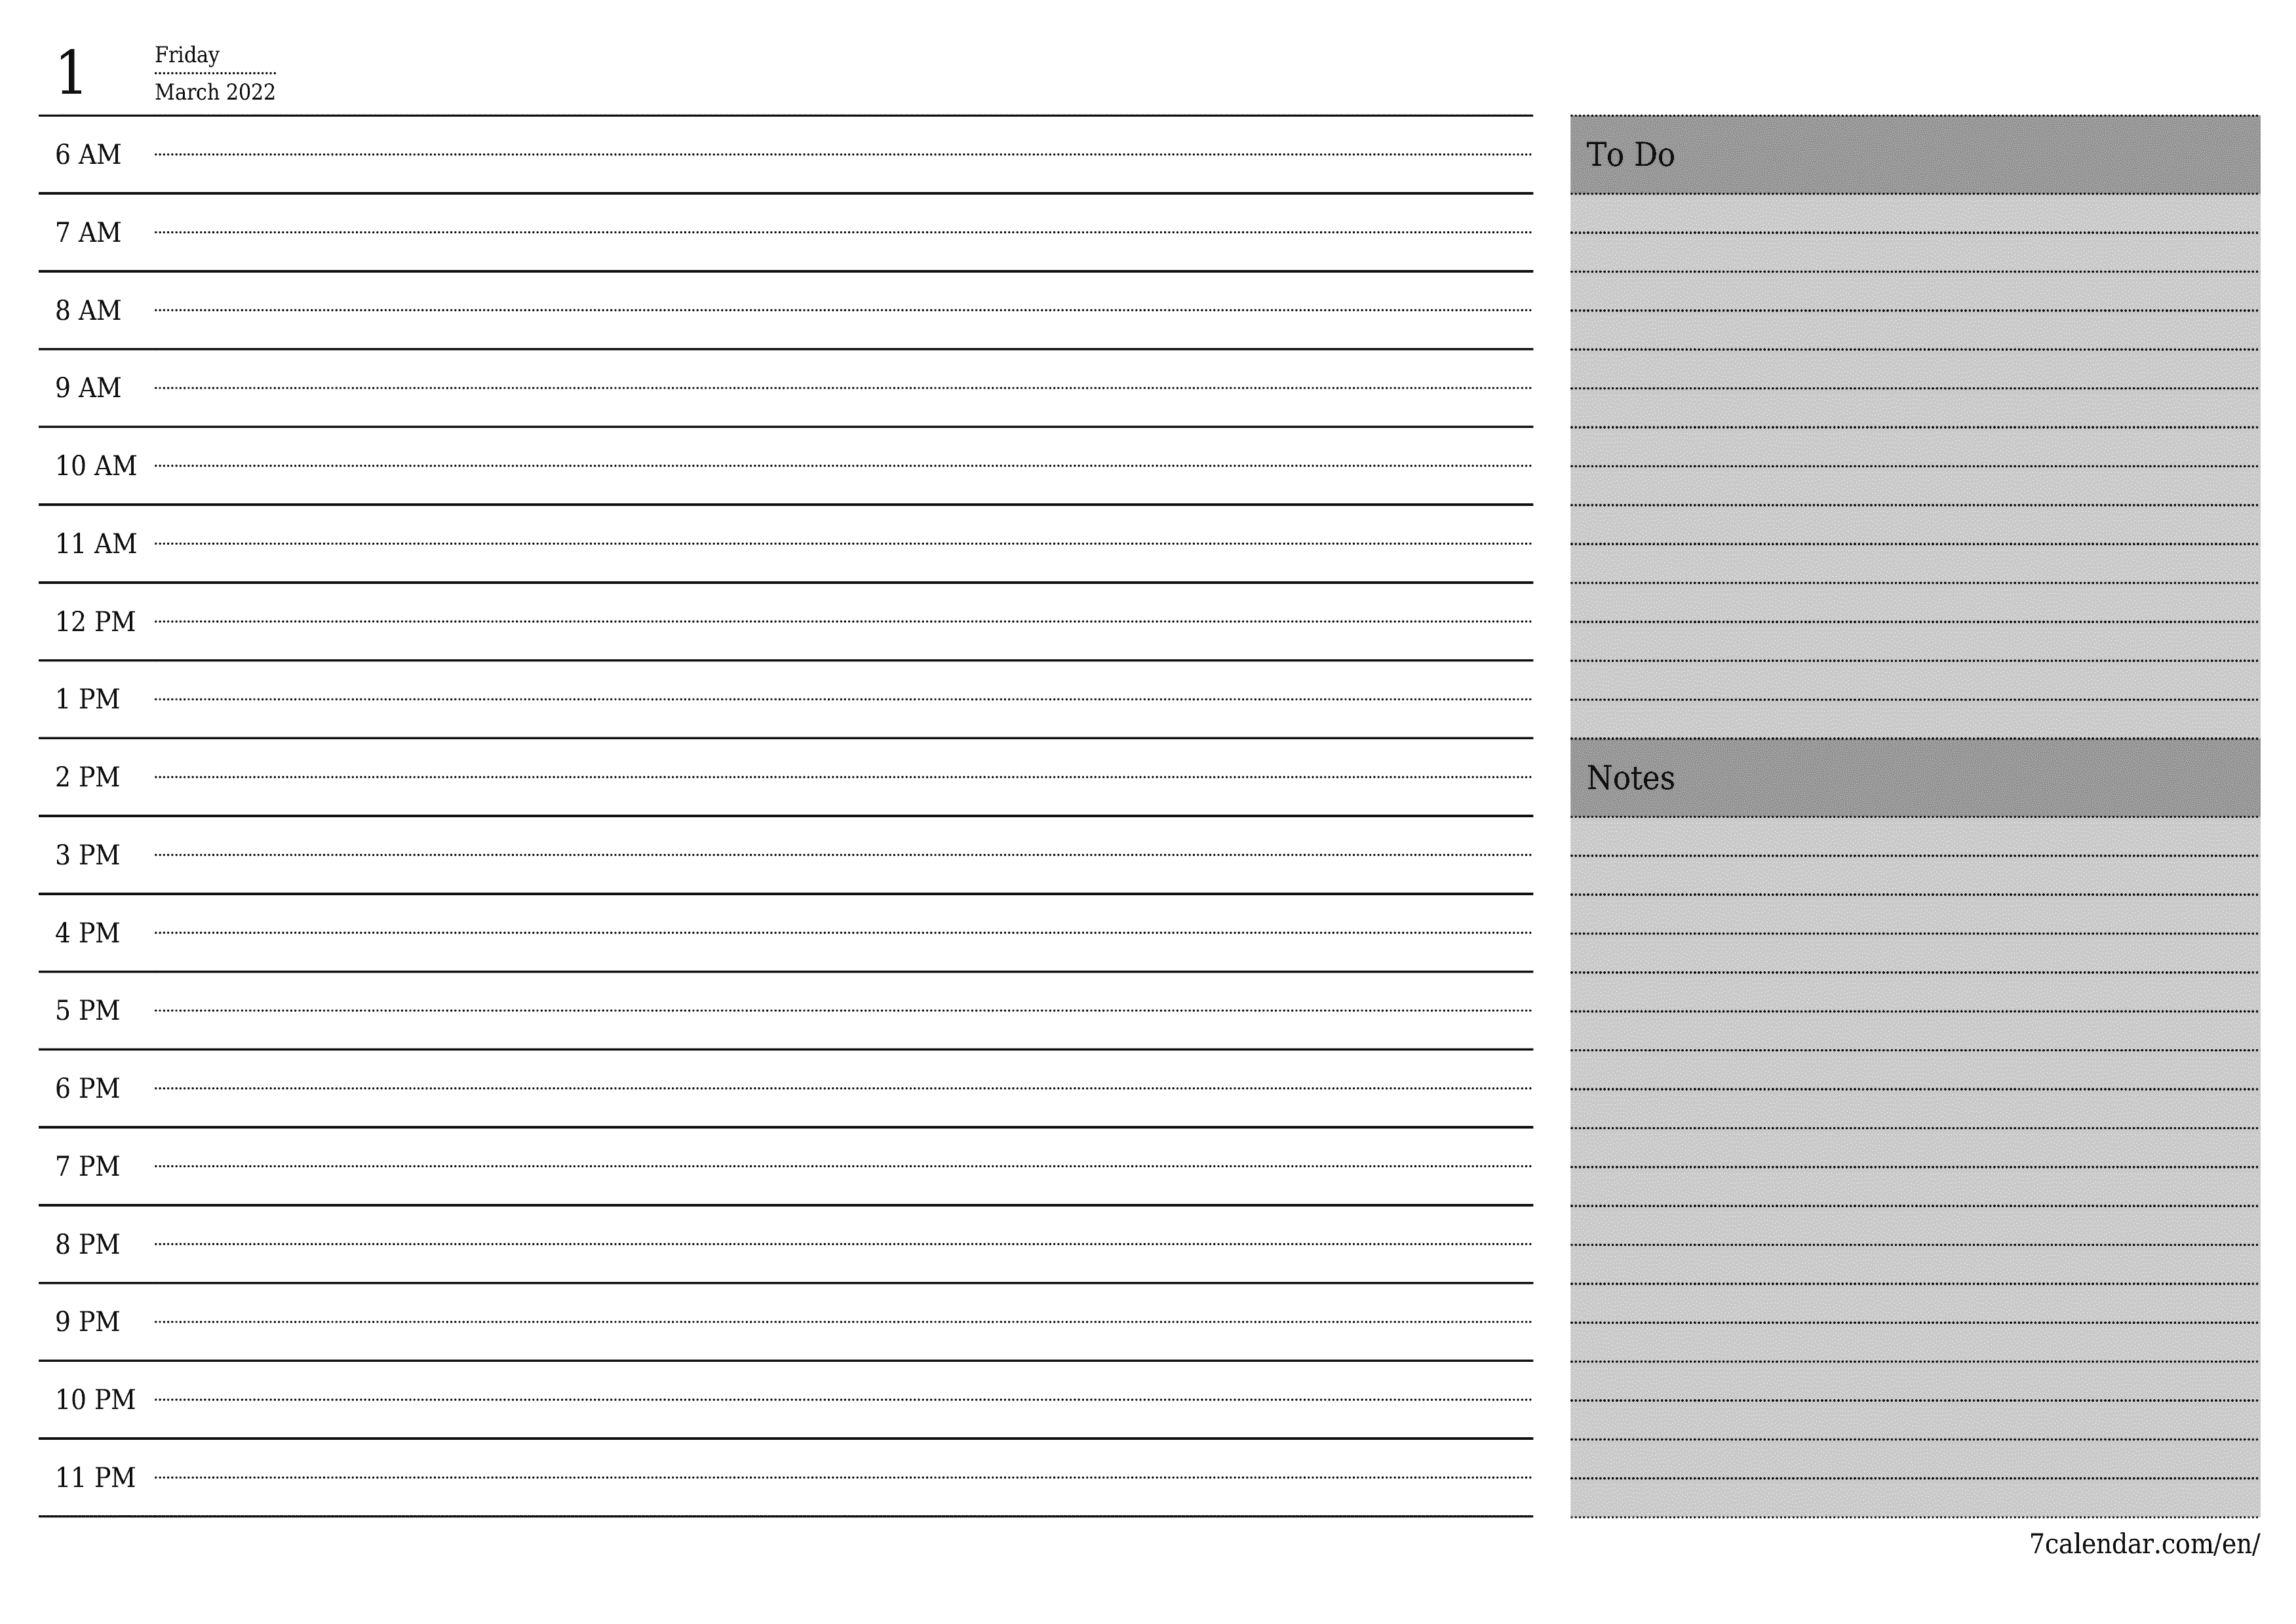 Blank daily printable calendar and planner for day March 2022 with notes, save and print to PDF PNG English - 7calendar.com